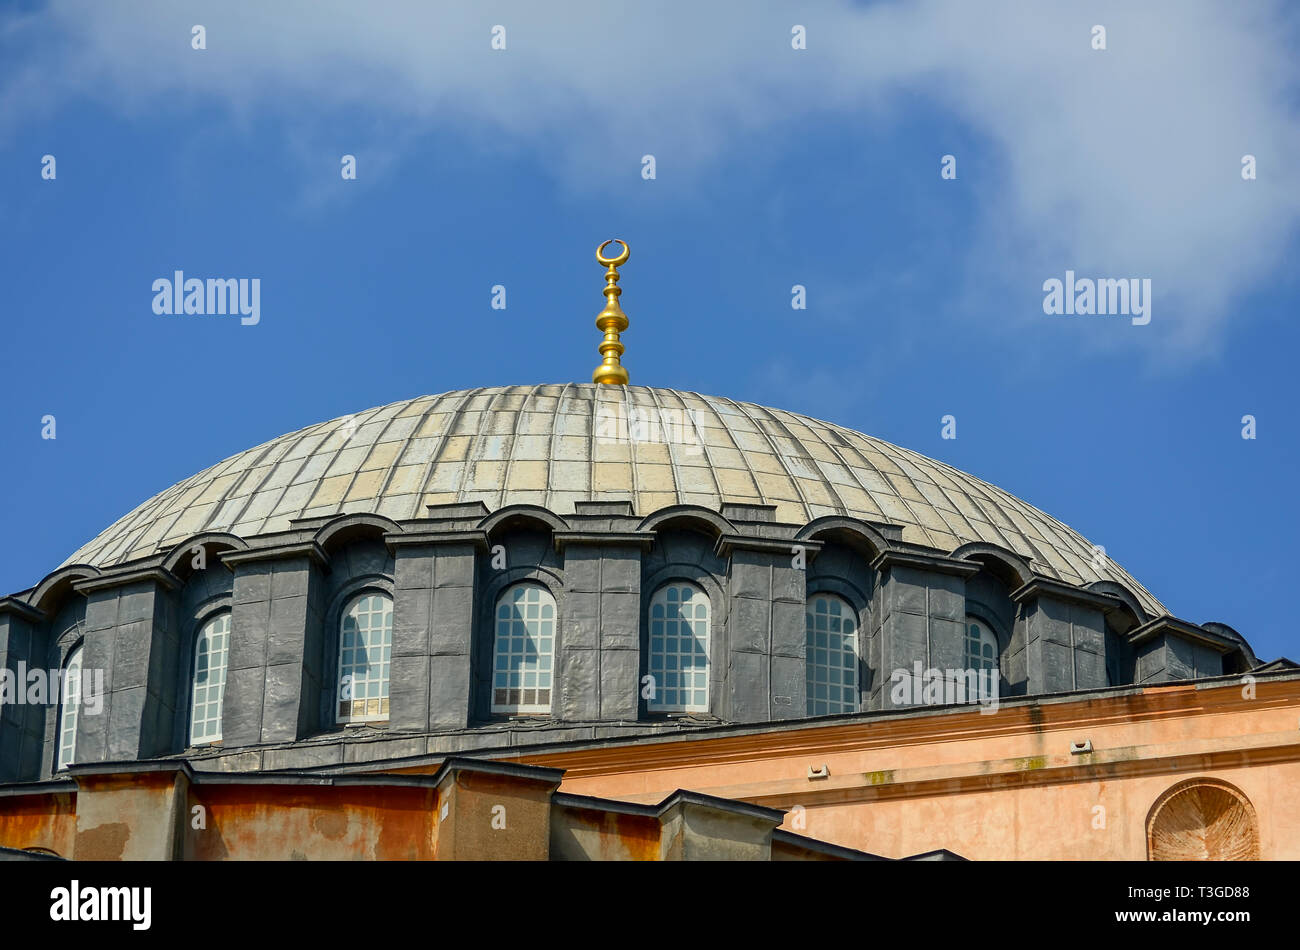 Dome of the Hagia Sophia in Istanbul close up against the blue sky Stock Photo